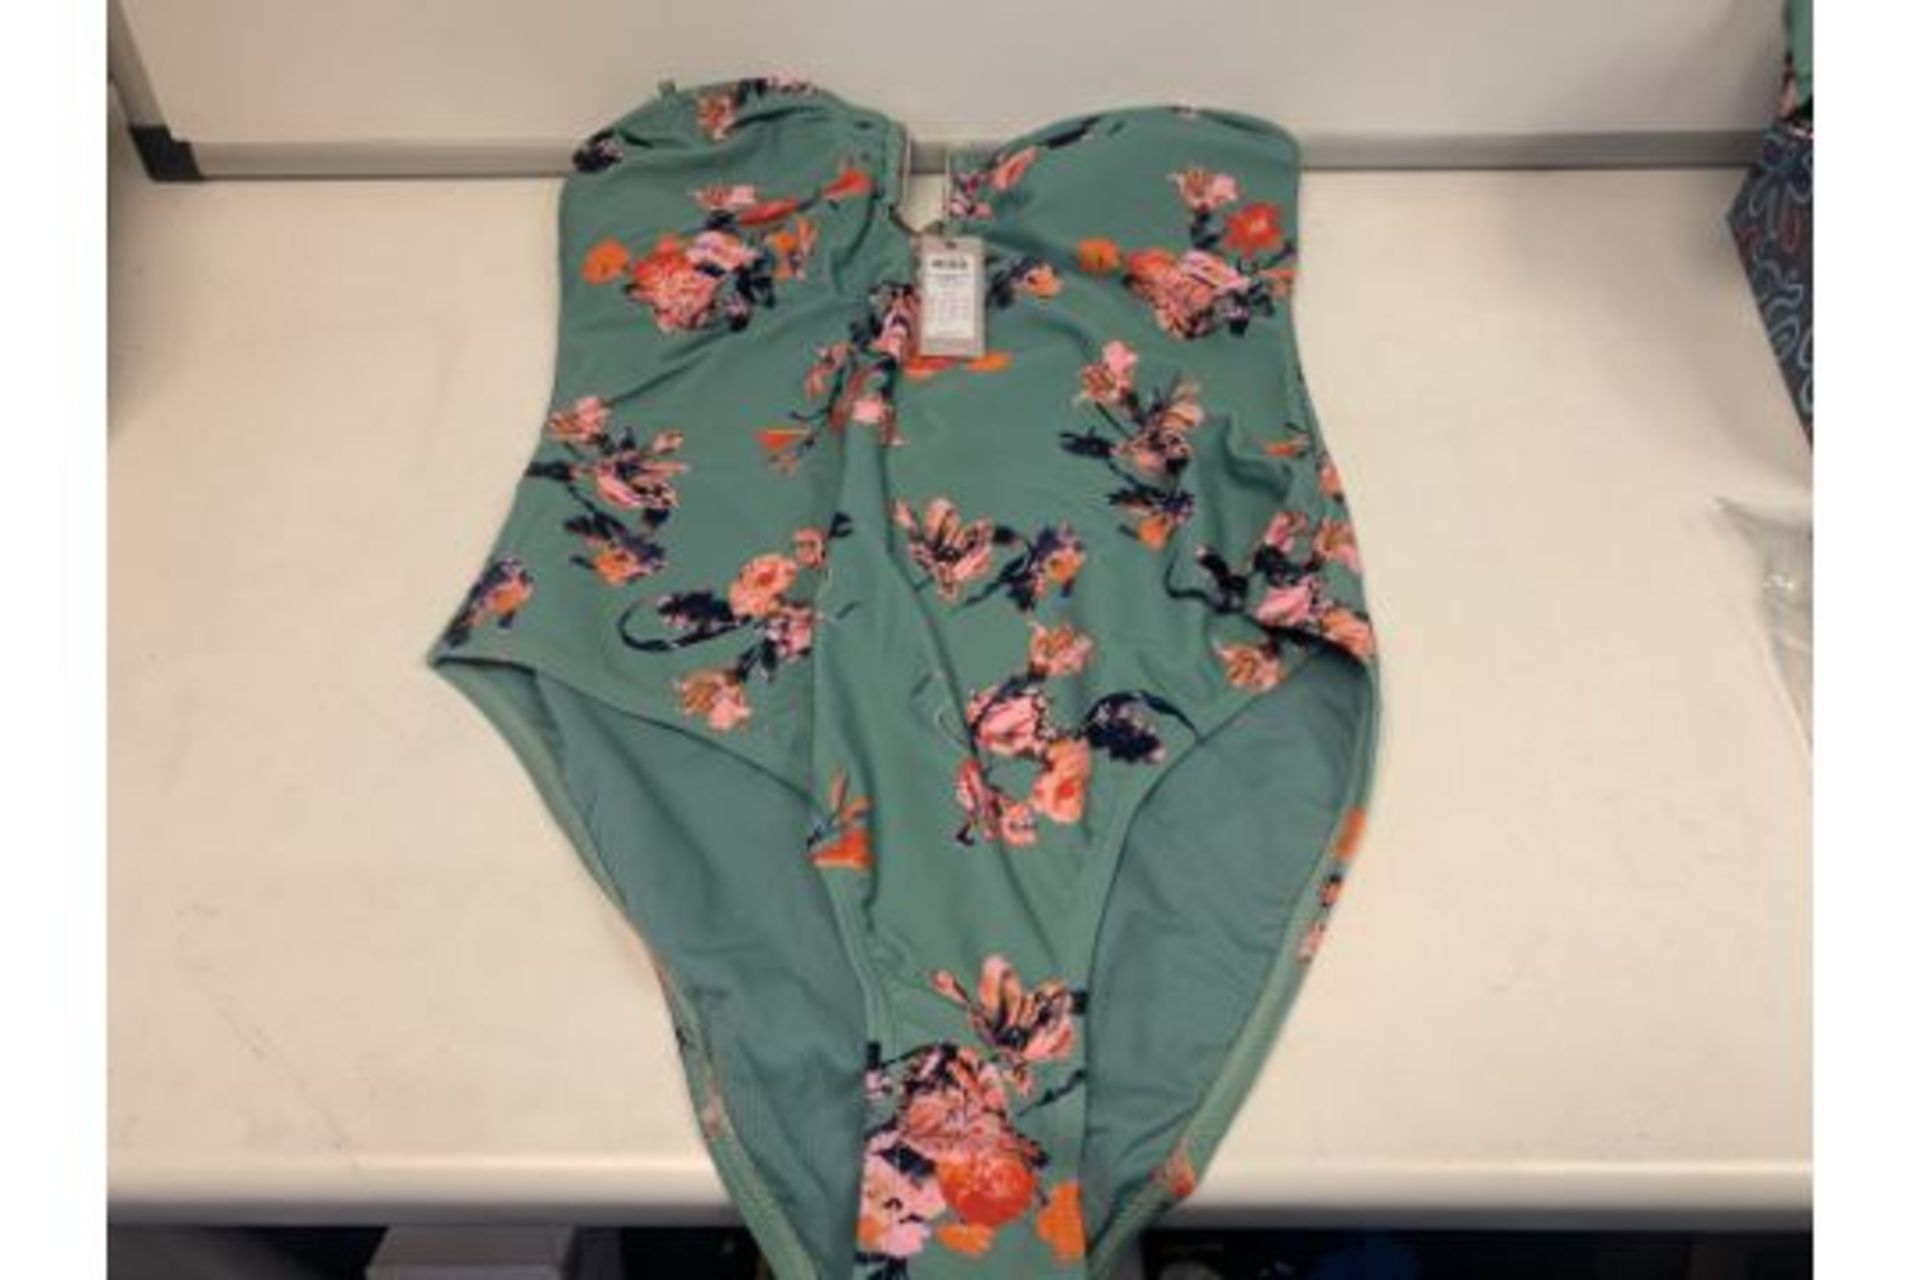 10 X BRAND NEW INDIVUDUALLY PACKAGED PIECES GREEN FLOWER PCYNYNNE SWIMSUITS IN VARIOUS SIZES 123/1/6